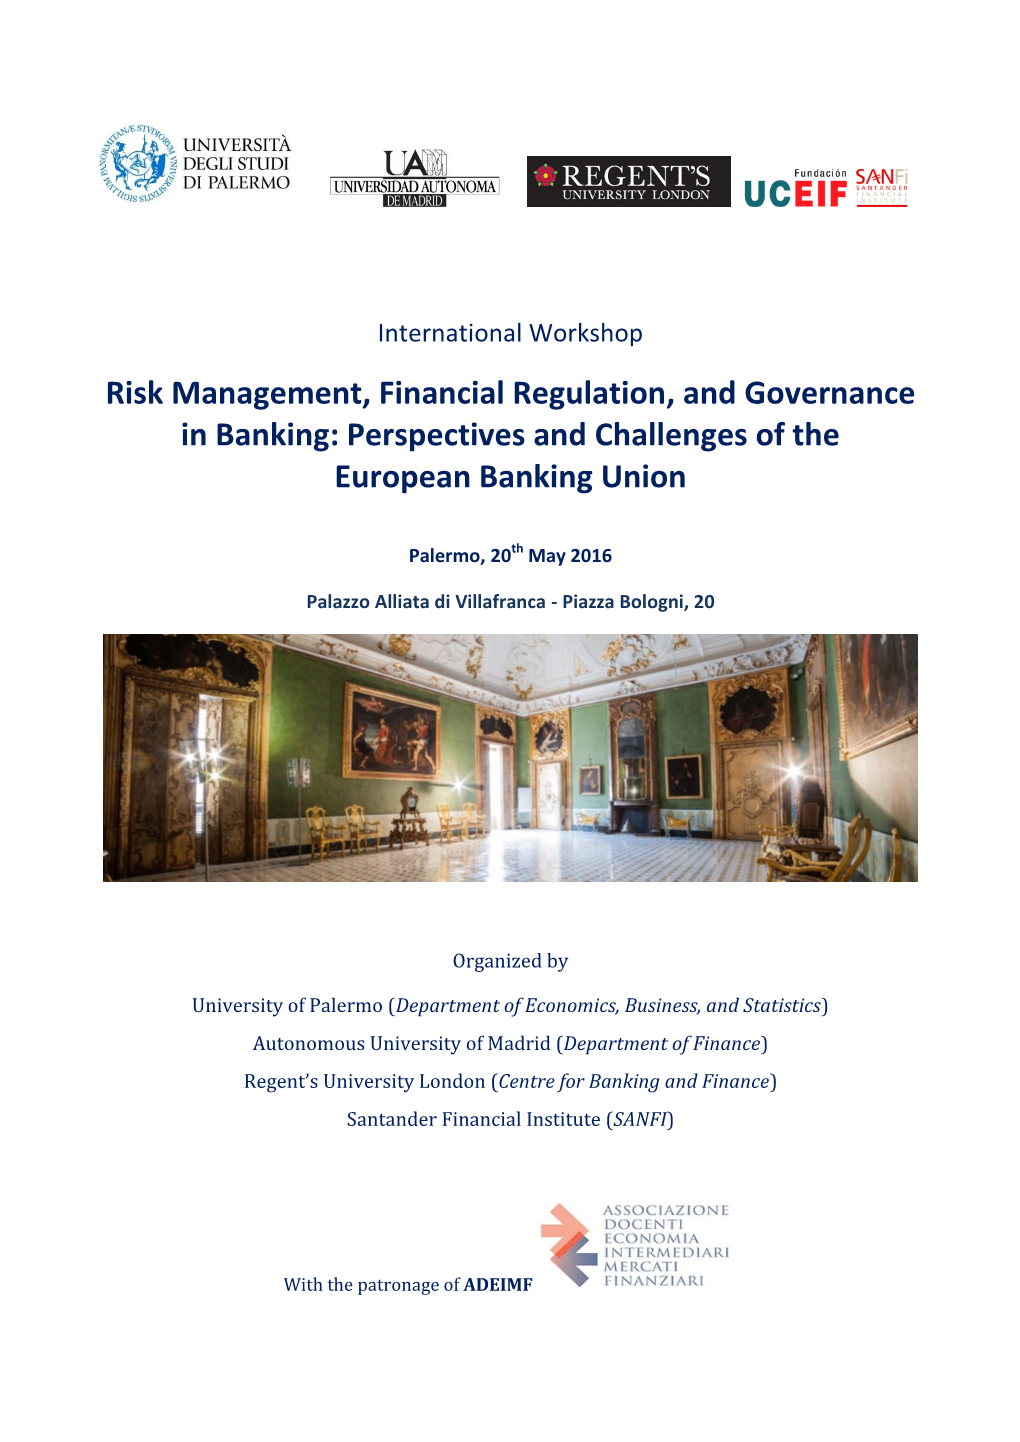 Perspectives and Challenges of the European Banking Union